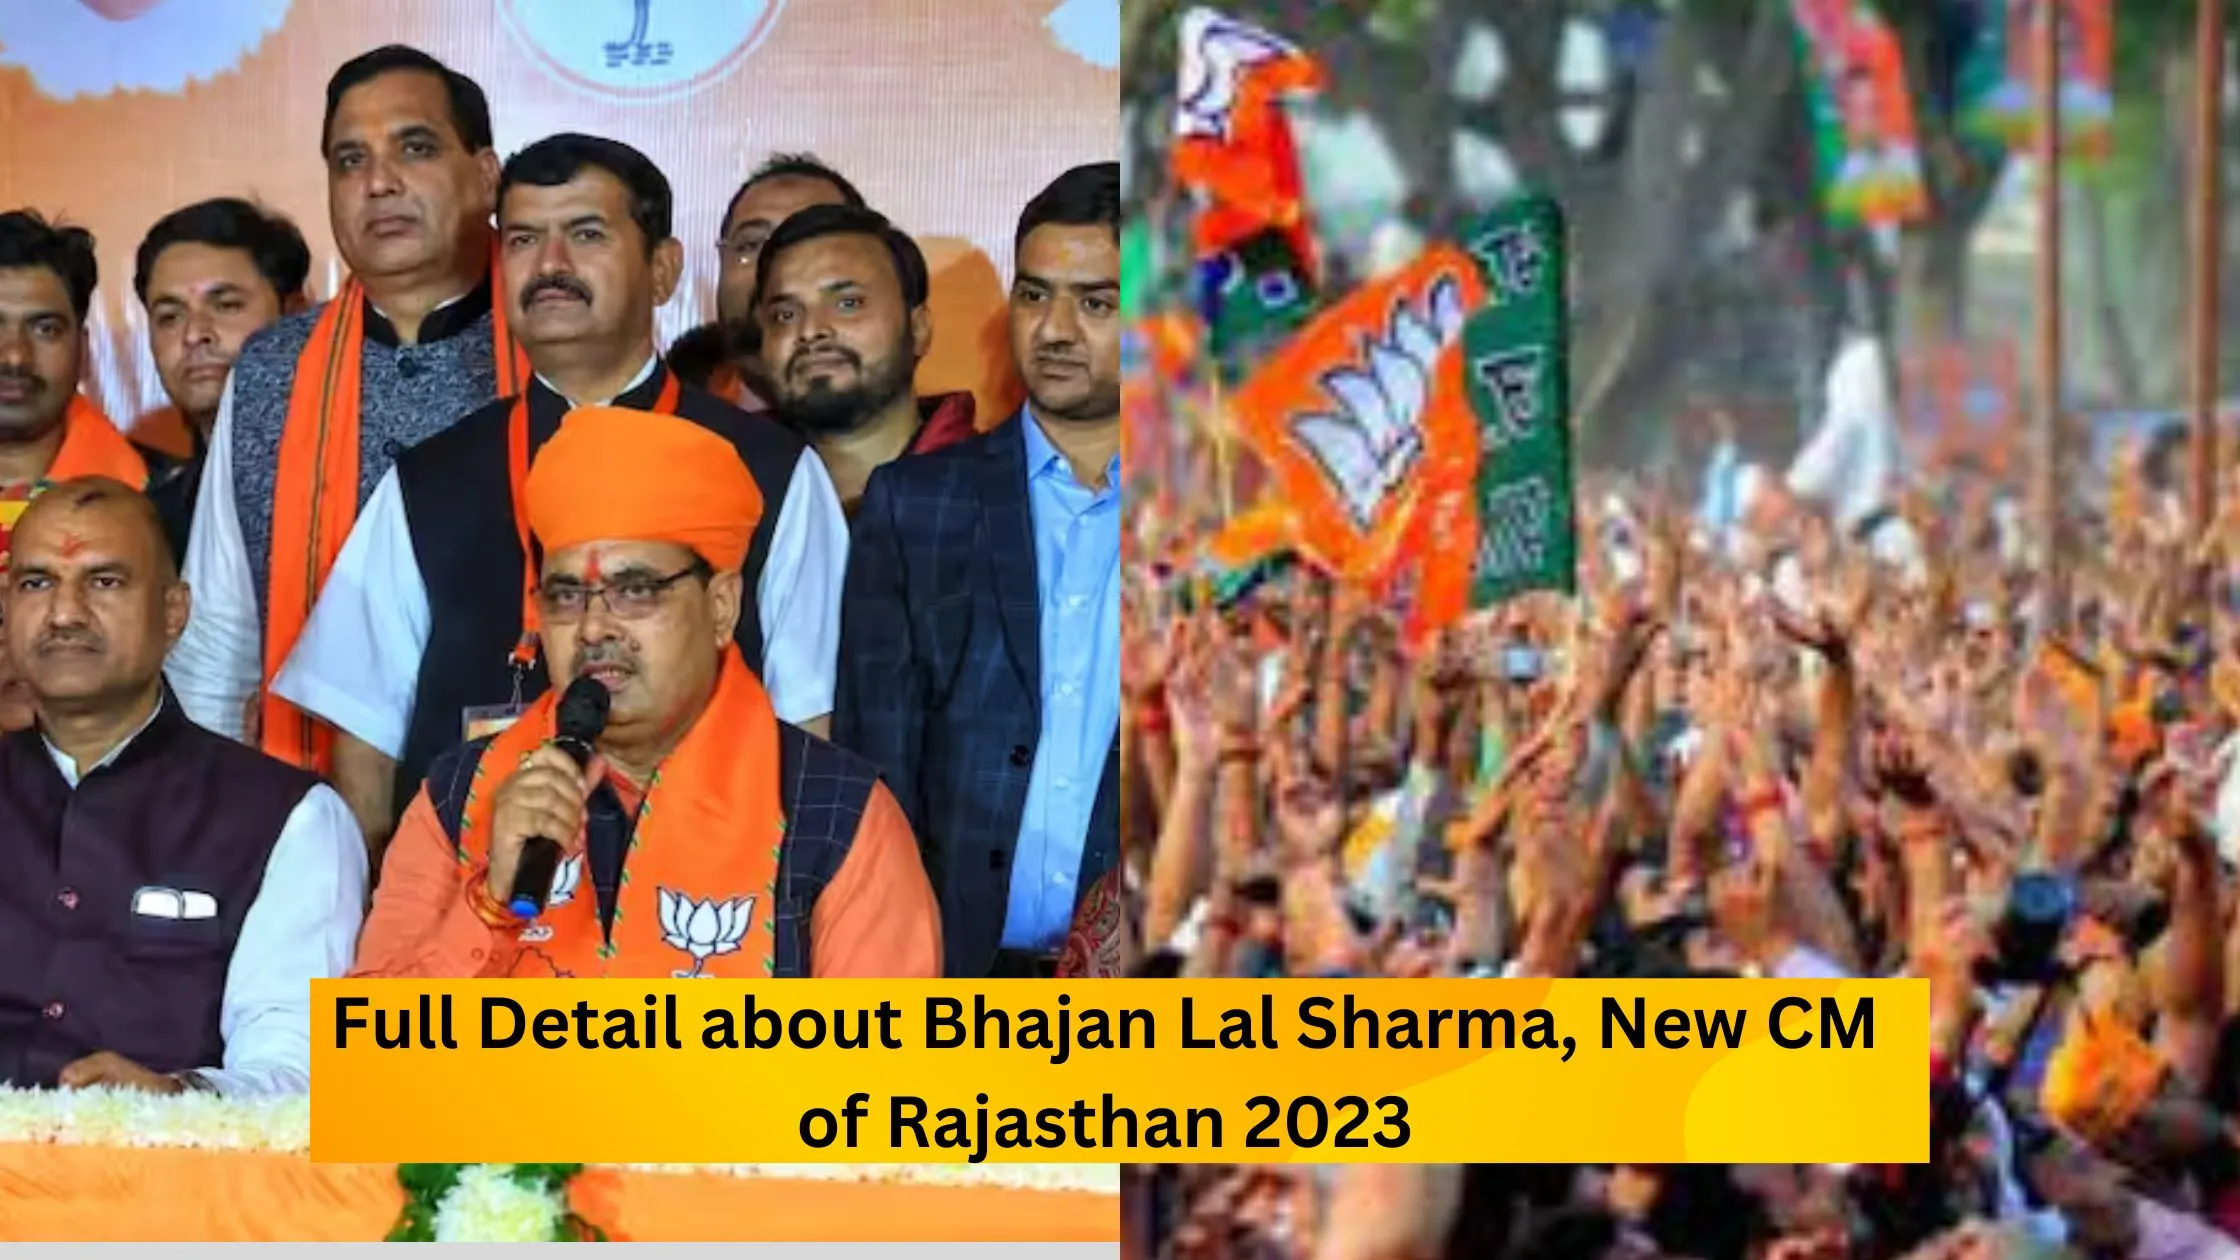 Full Detail about Bhajan Lal Sharma, New CM of Rajasthan 2023